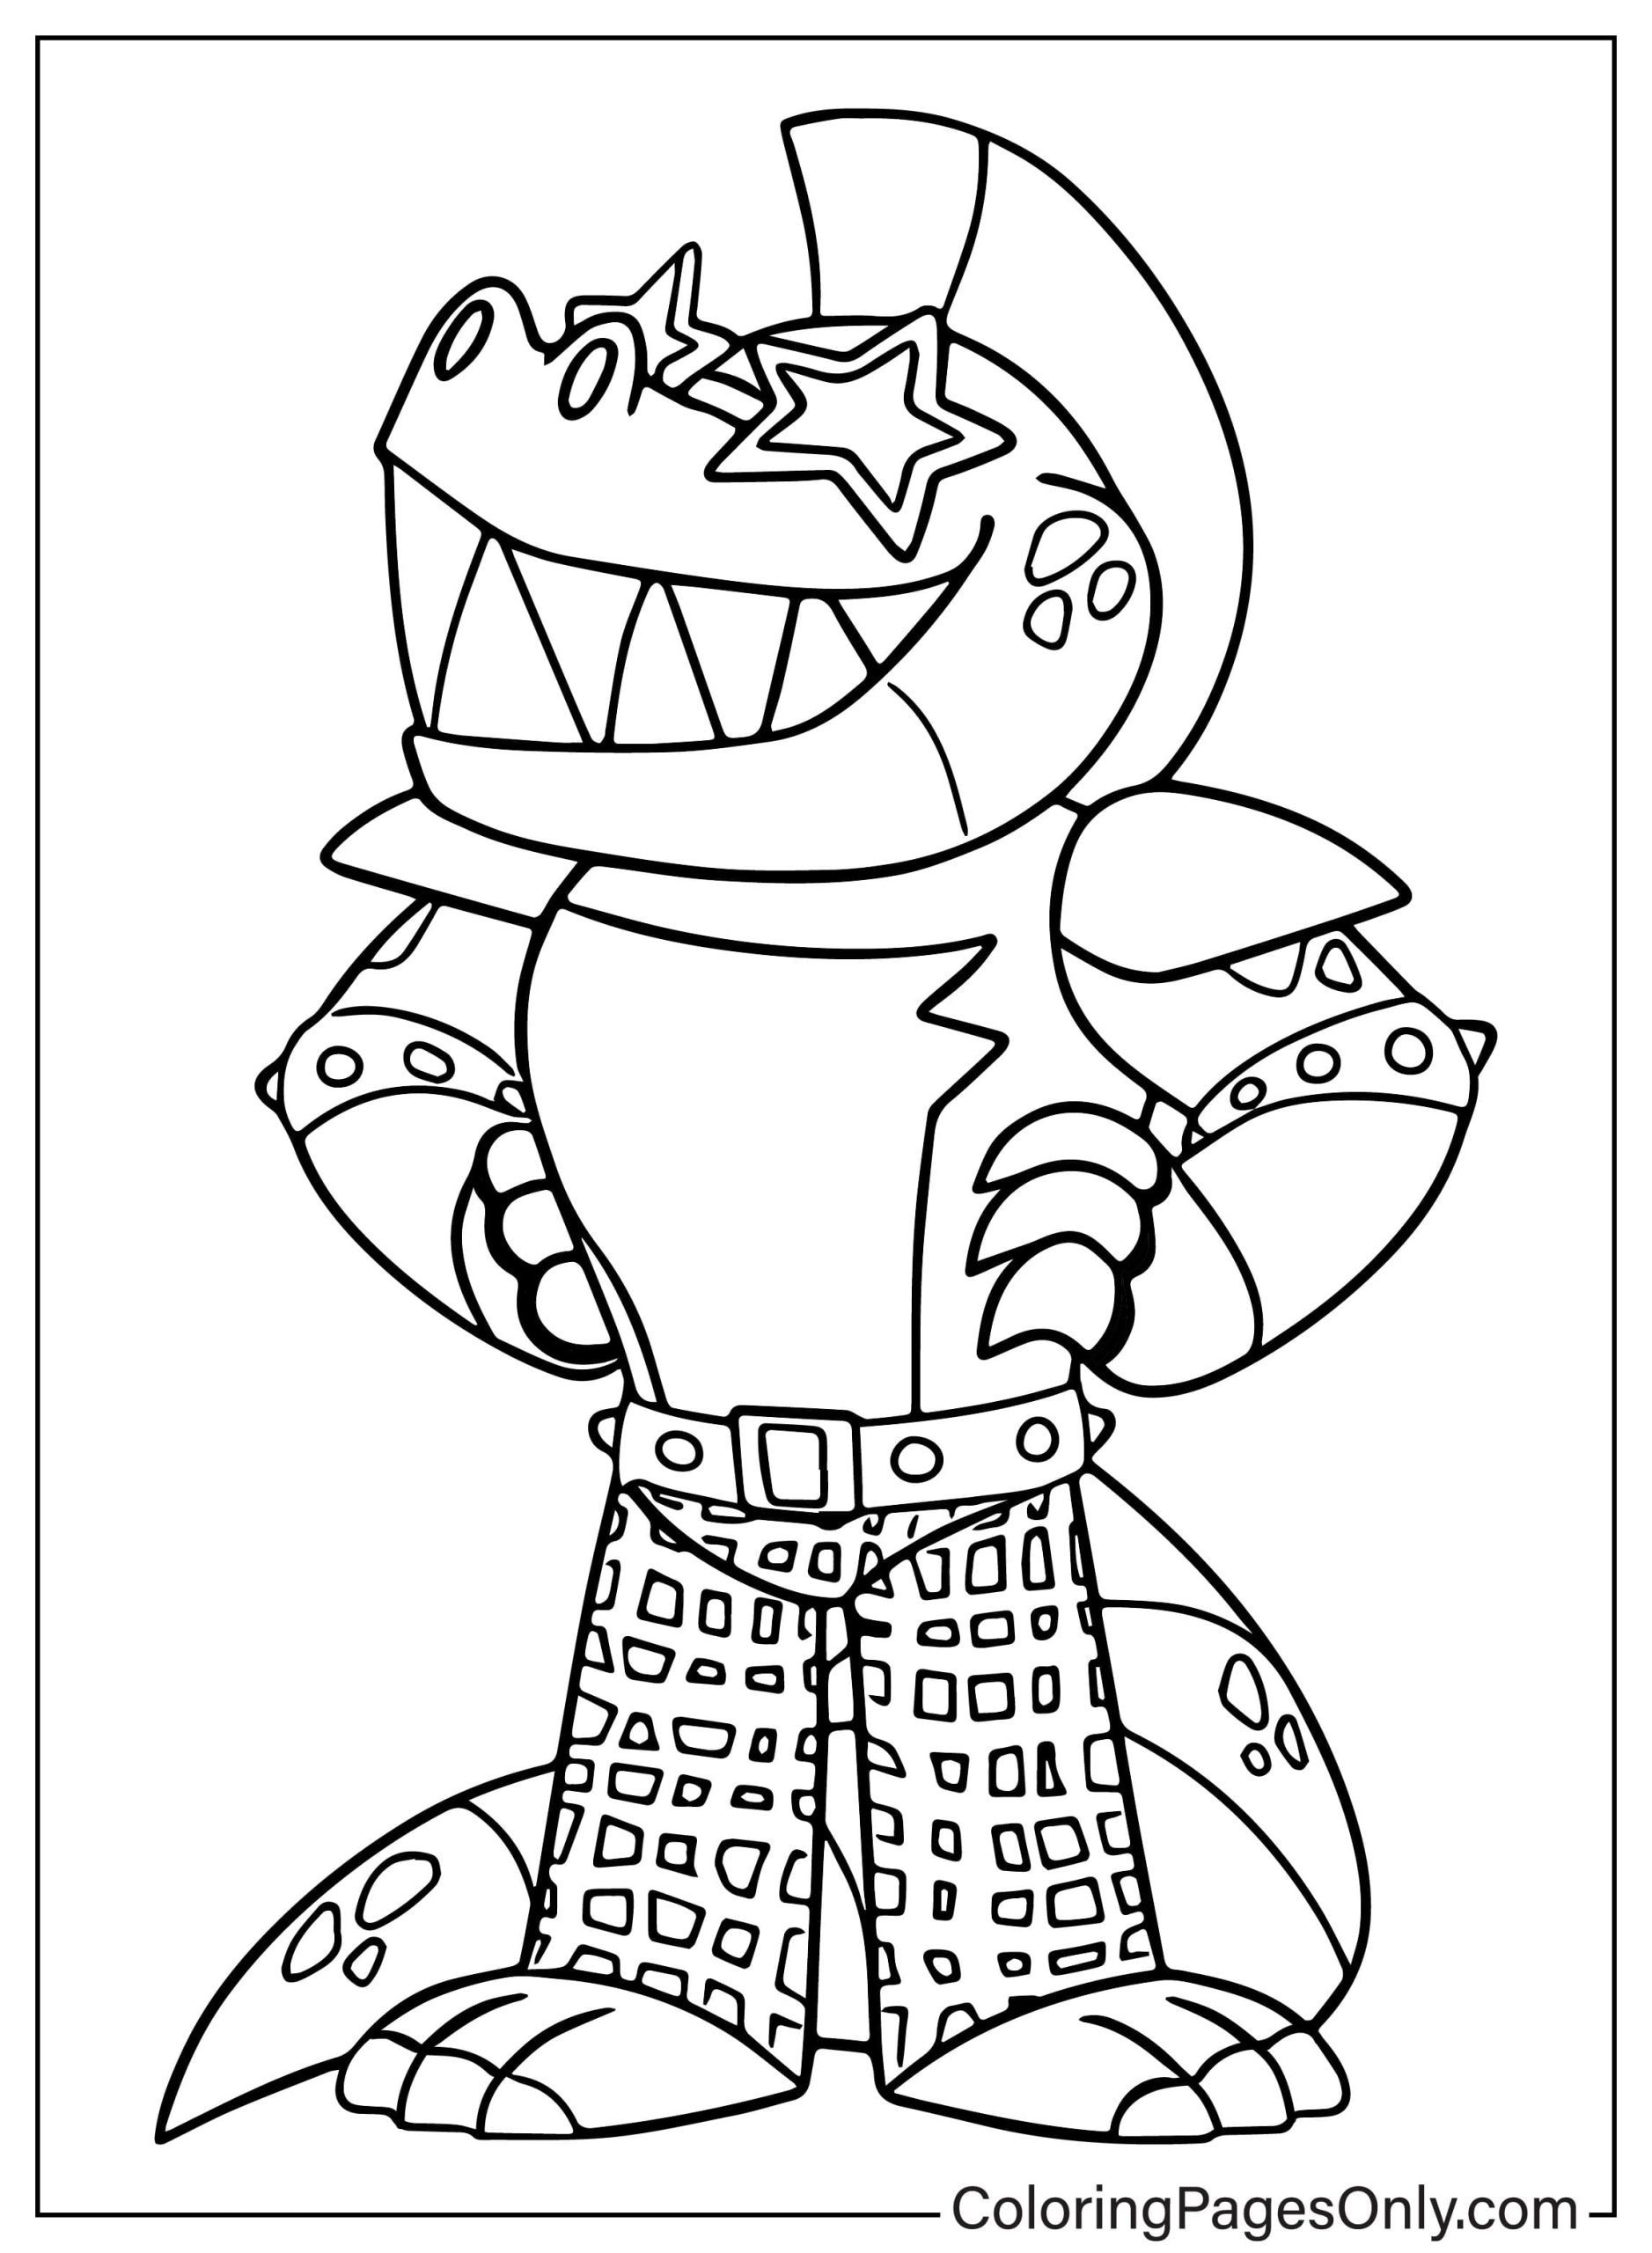 Montgomery Gator Coloring Page - Free ...